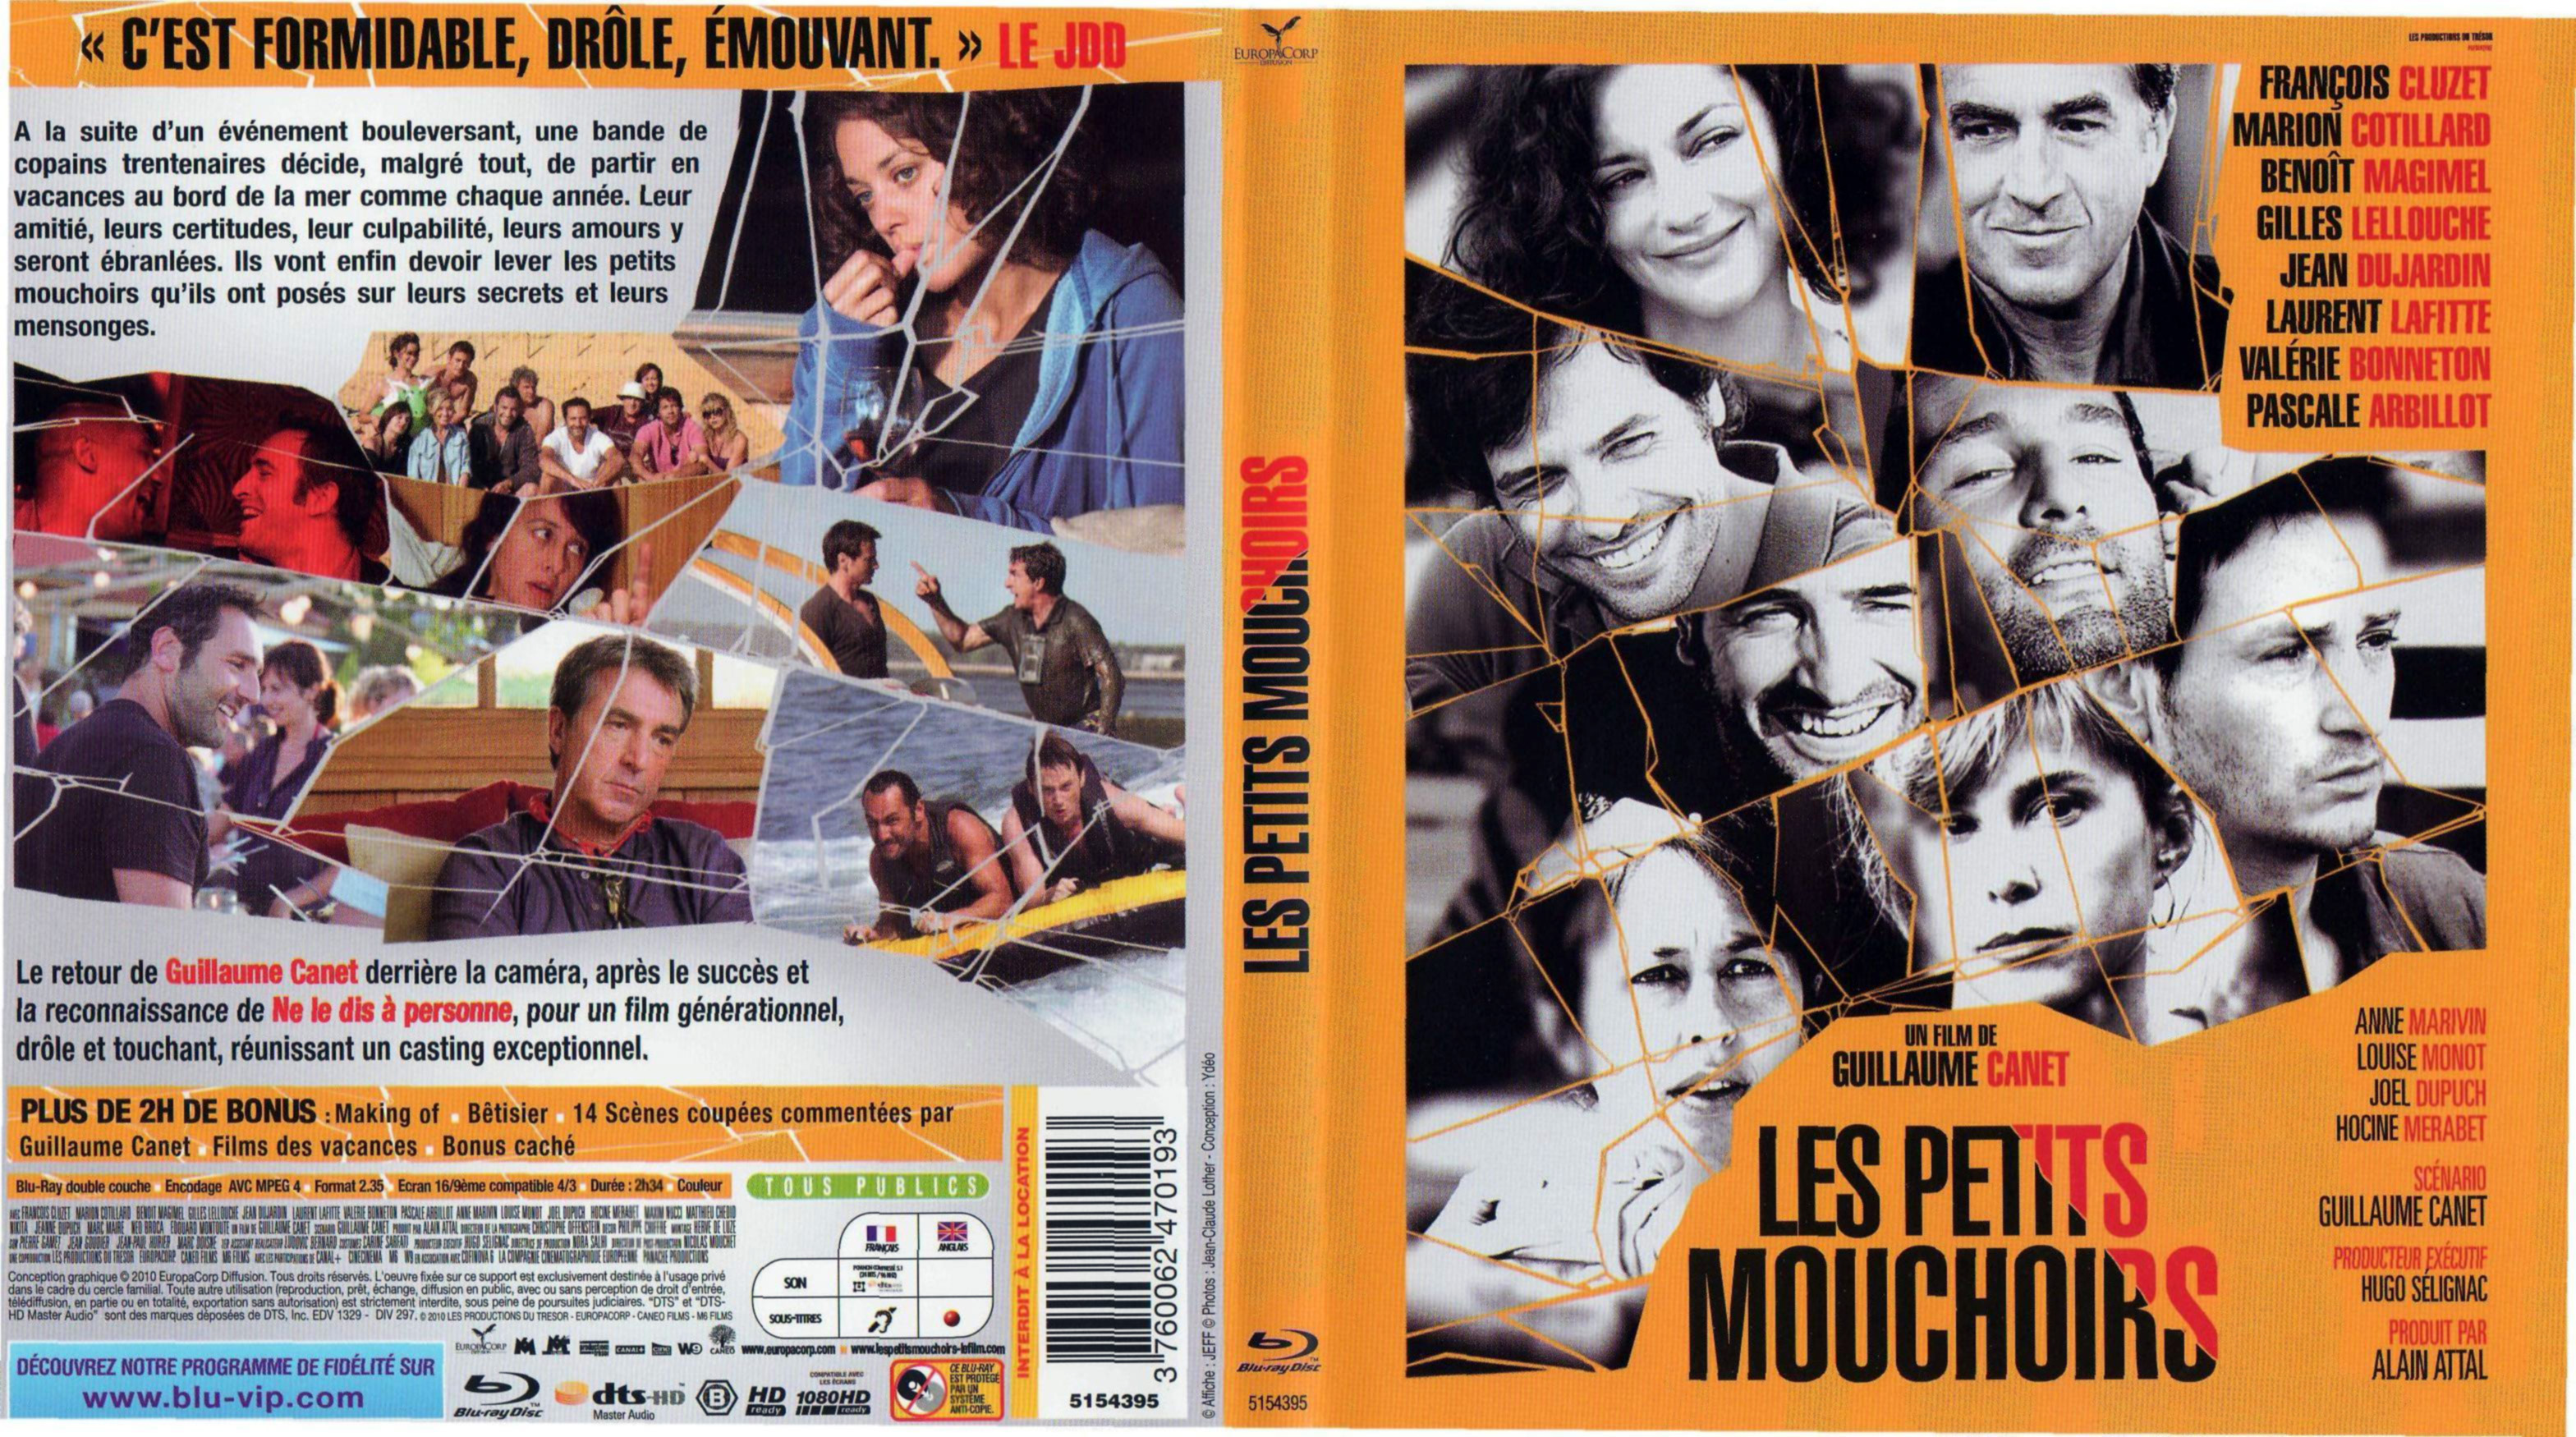 Jaquette DVD Les petits mouchoirs (BLU-RAY)